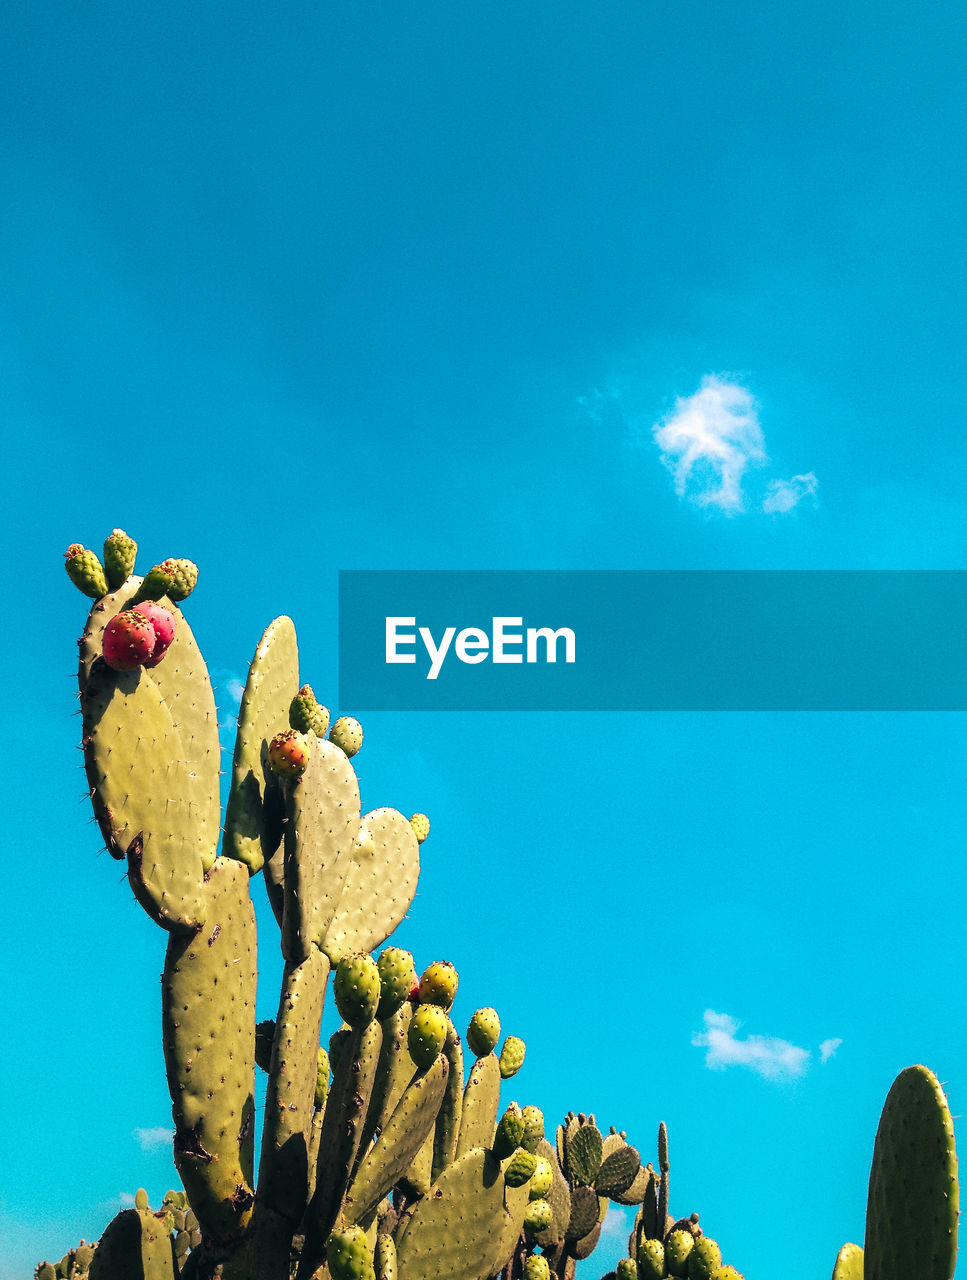 Low angle view of prickly pear cactus against blue sky